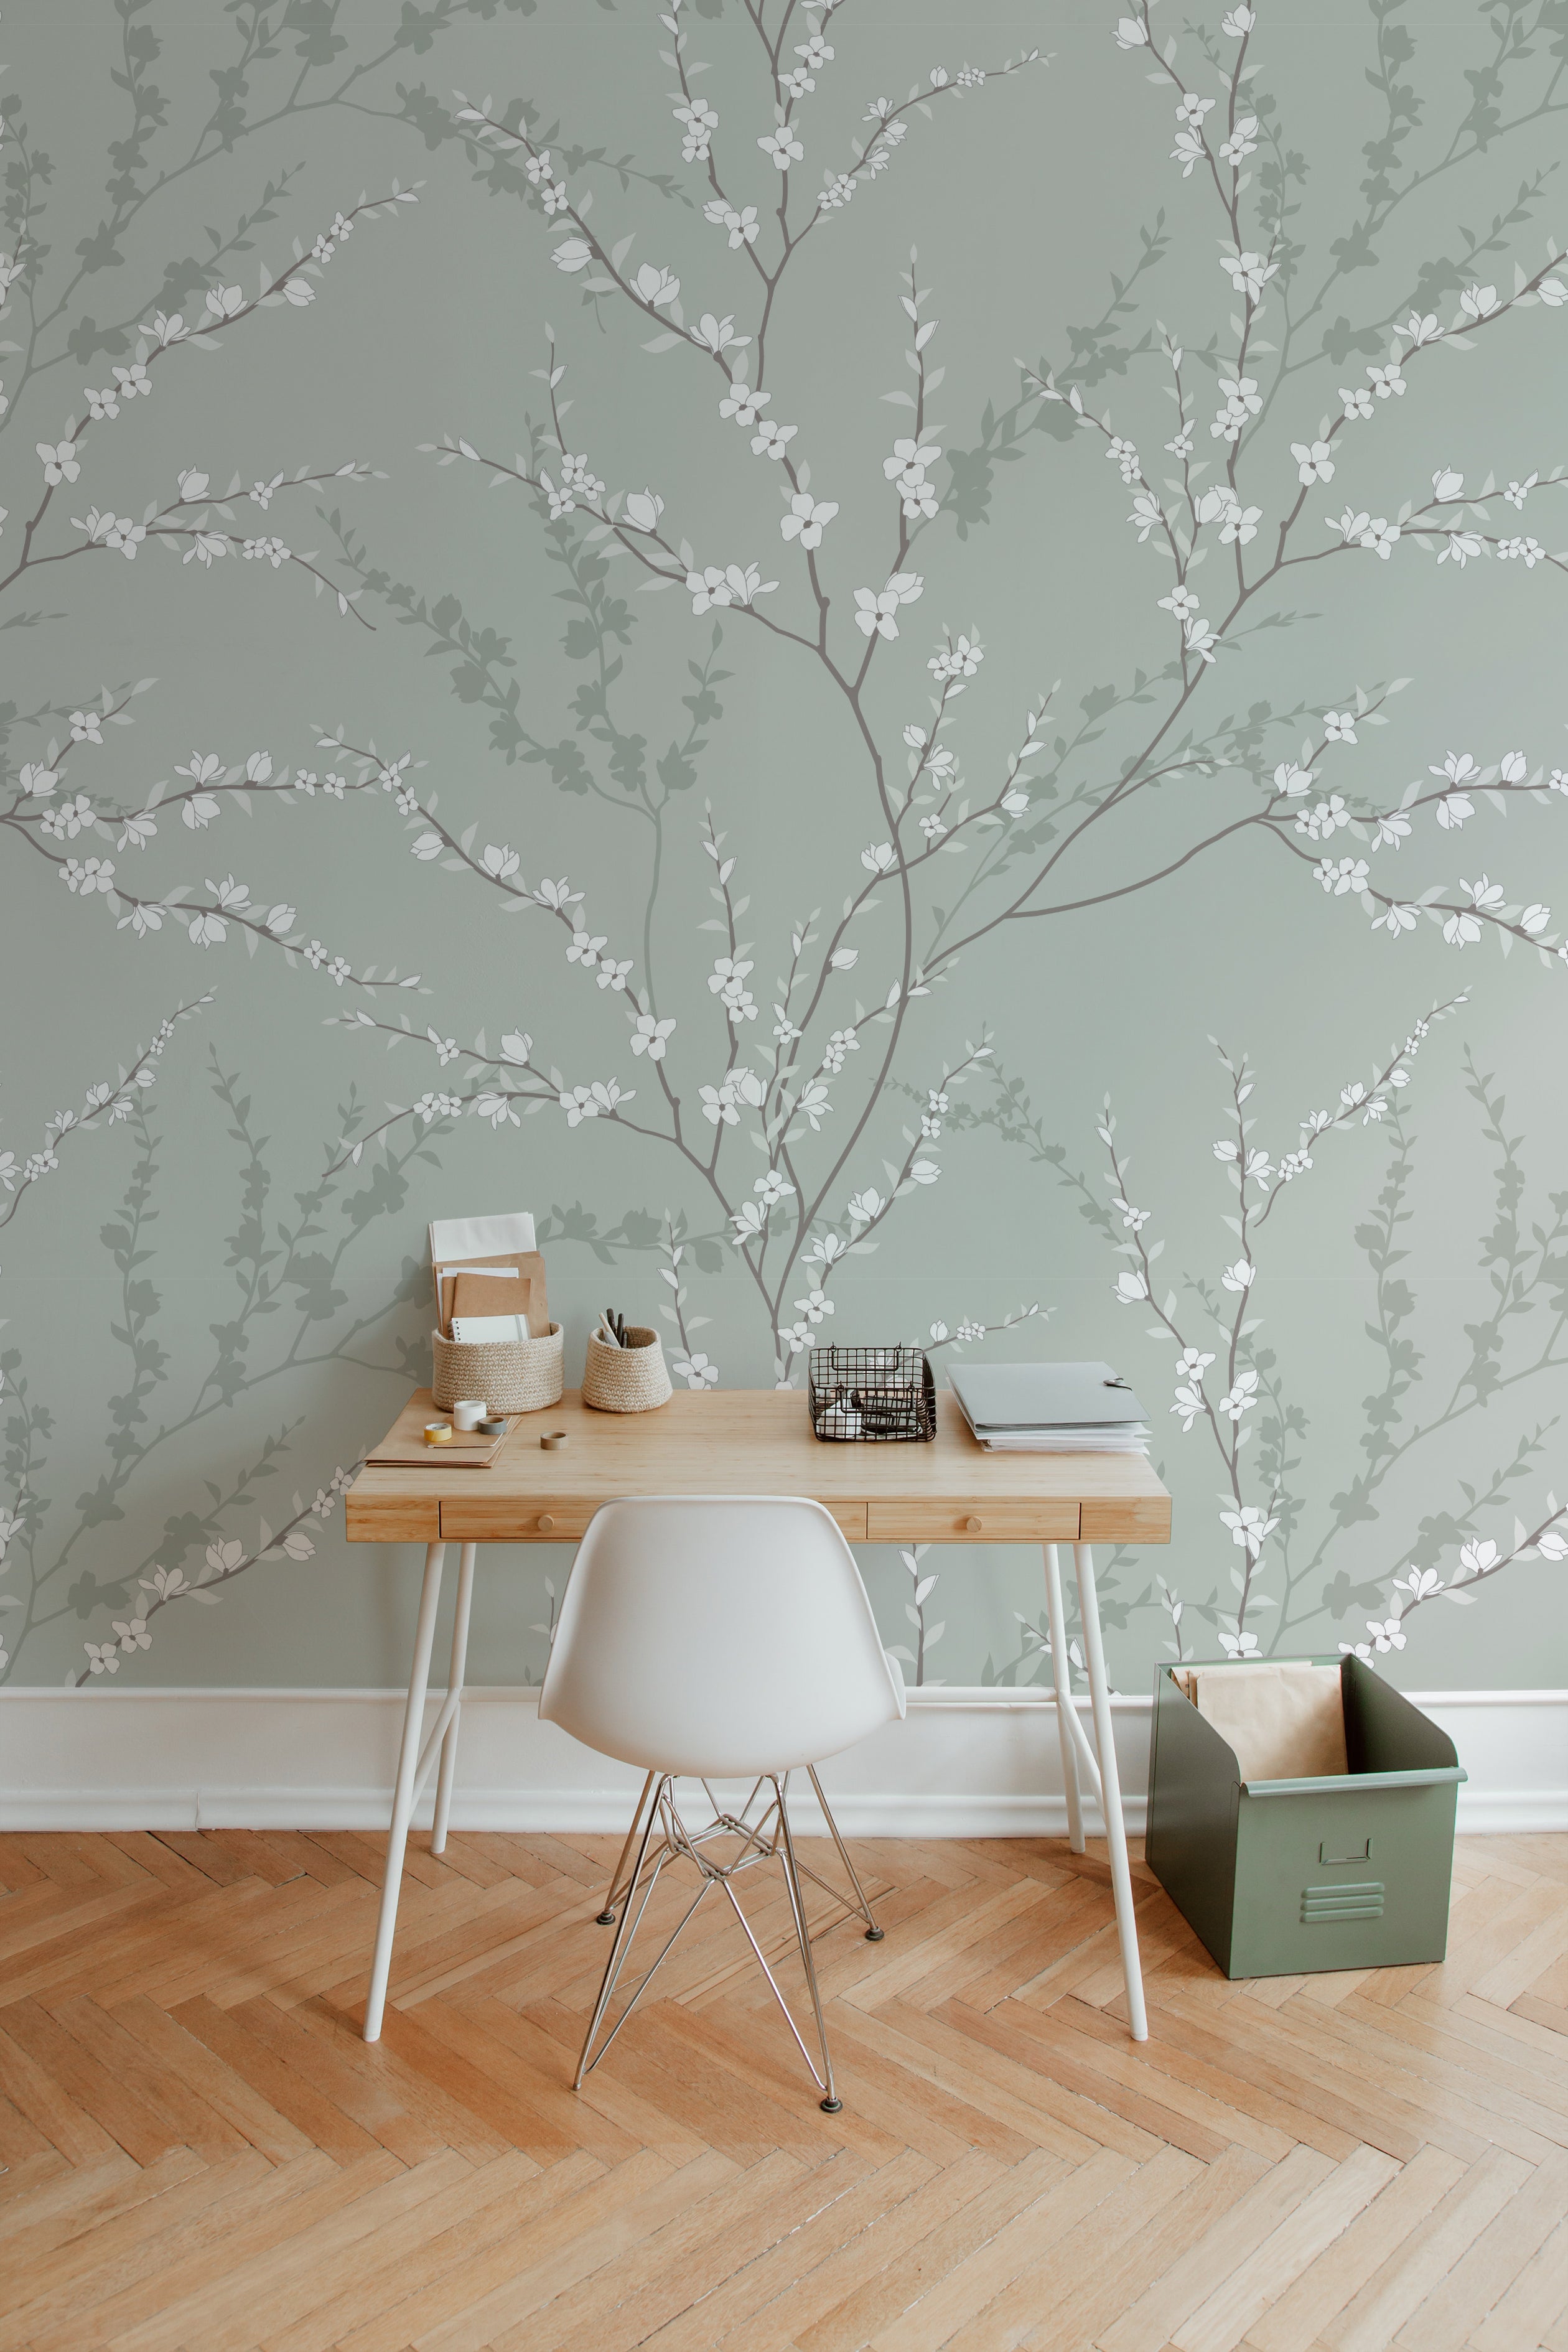 A modern workspace elegantly enhanced by the Enchanted Blossoms Wallpaper. The wallpaper forms a beautiful backdrop behind a minimalist wooden desk paired with a white modern chair. Simple office supplies and a vintage-inspired lamp complete the setup, emphasizing the wallpaper's ability to blend naturally into a stylish and functional area.